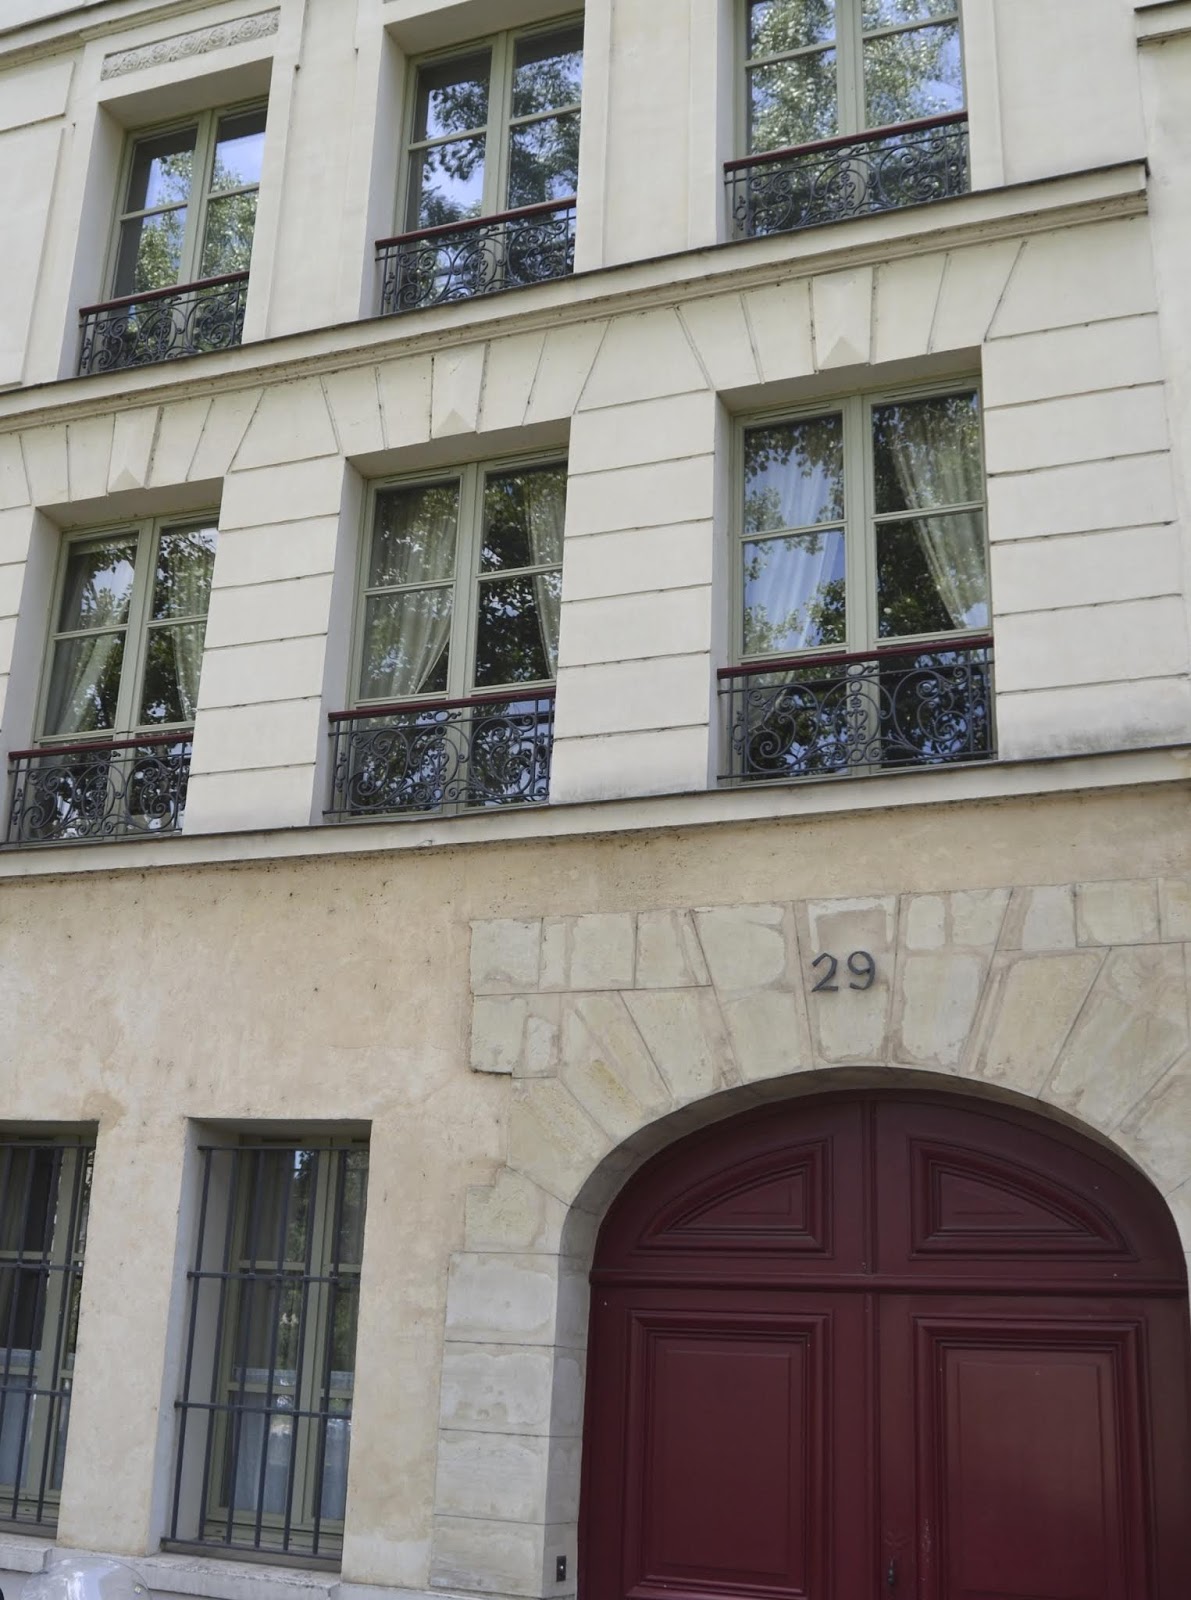 From Swerve of Shore to Bend of Bay: A Walking Tour of Joyce's Paris ...